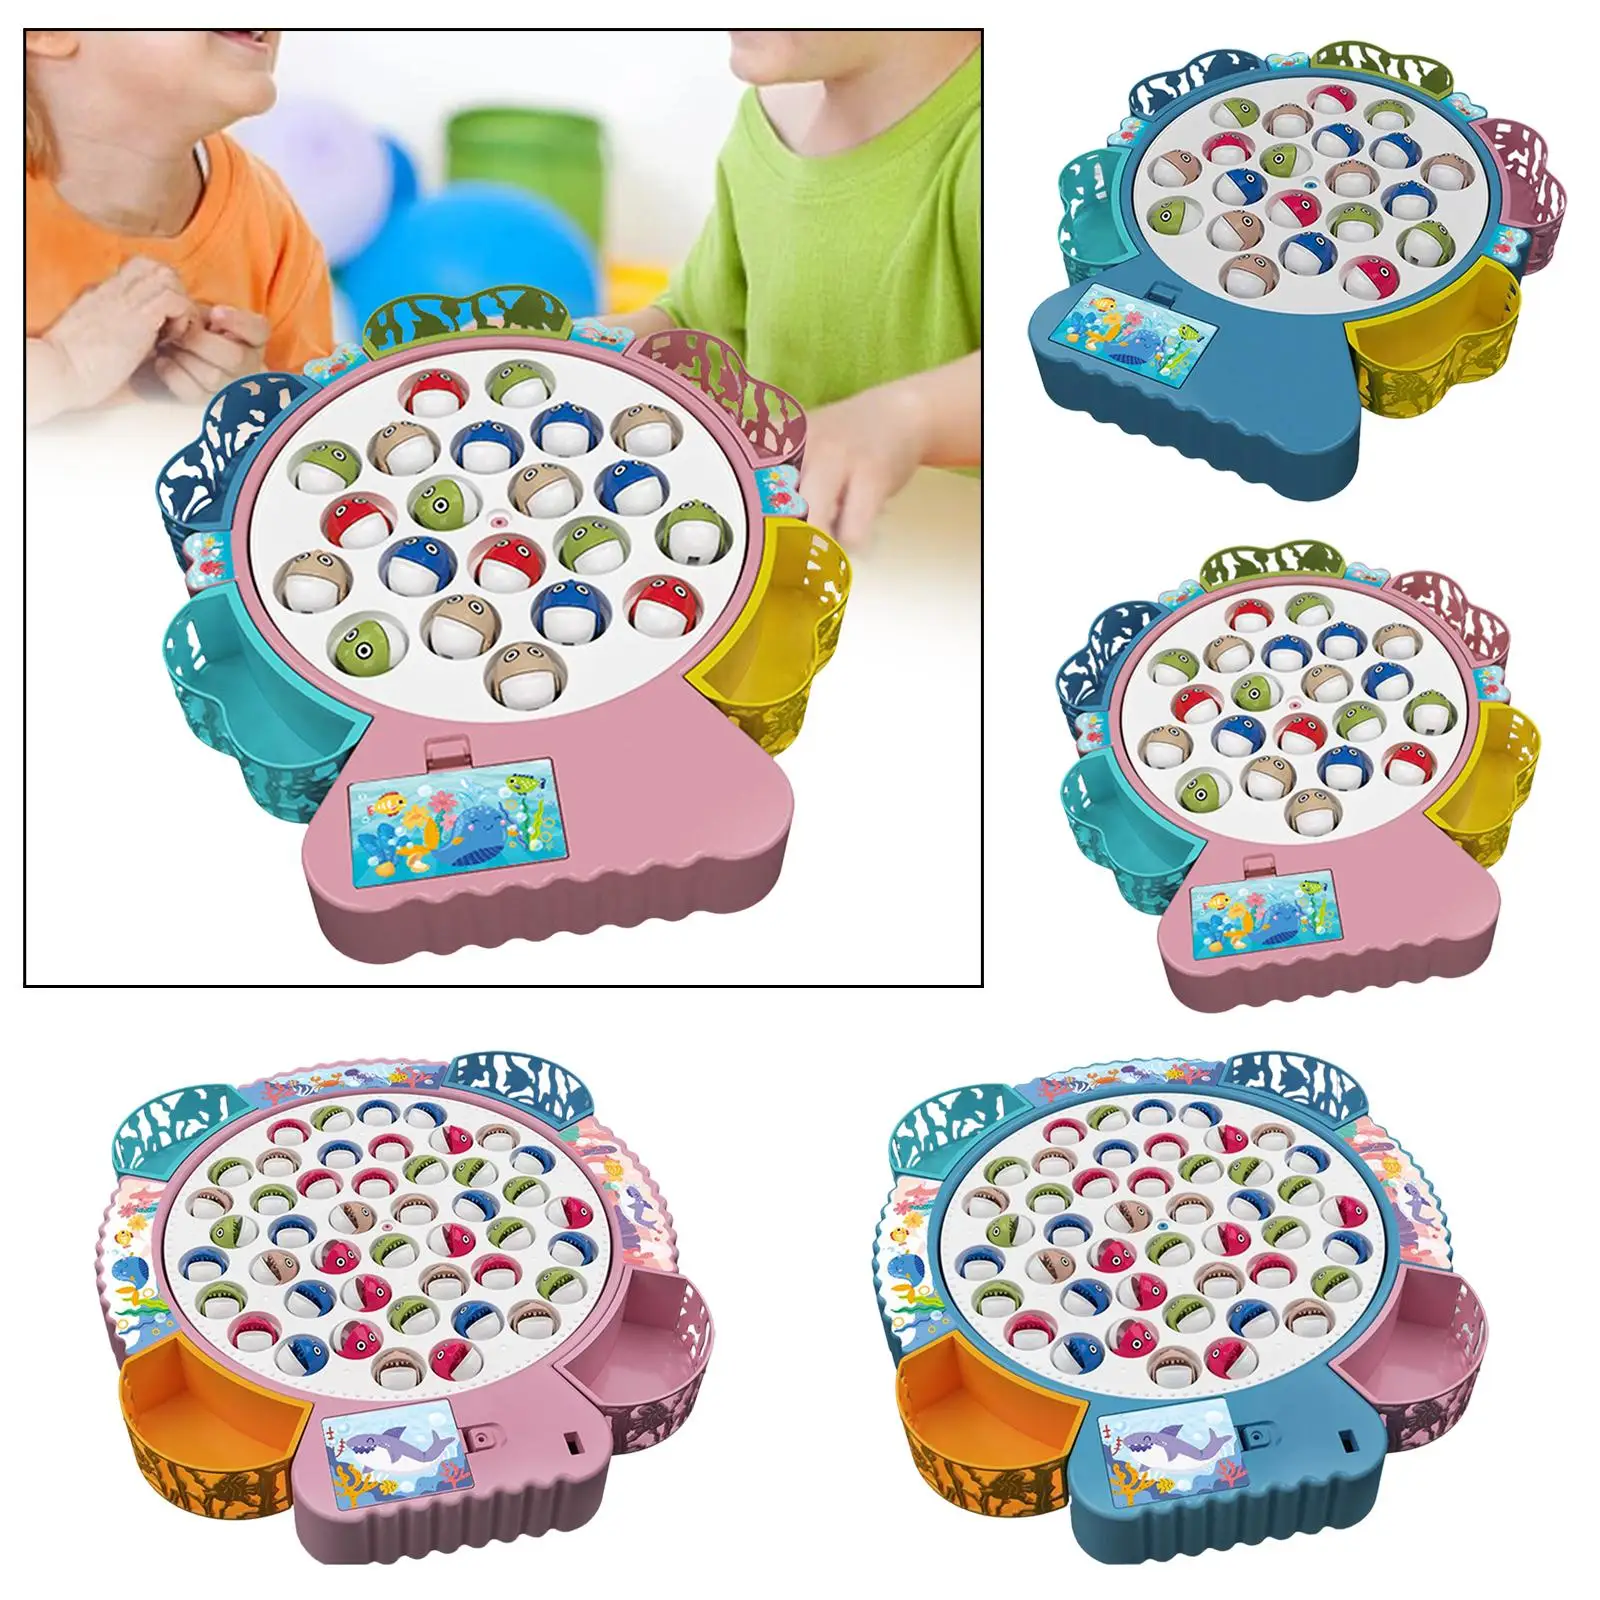 Fishing Game Play Set Colorful with 4 Fishing Poles Electric Fishing Toy with Music for Kids Toddlers Preschool Age 3 and up